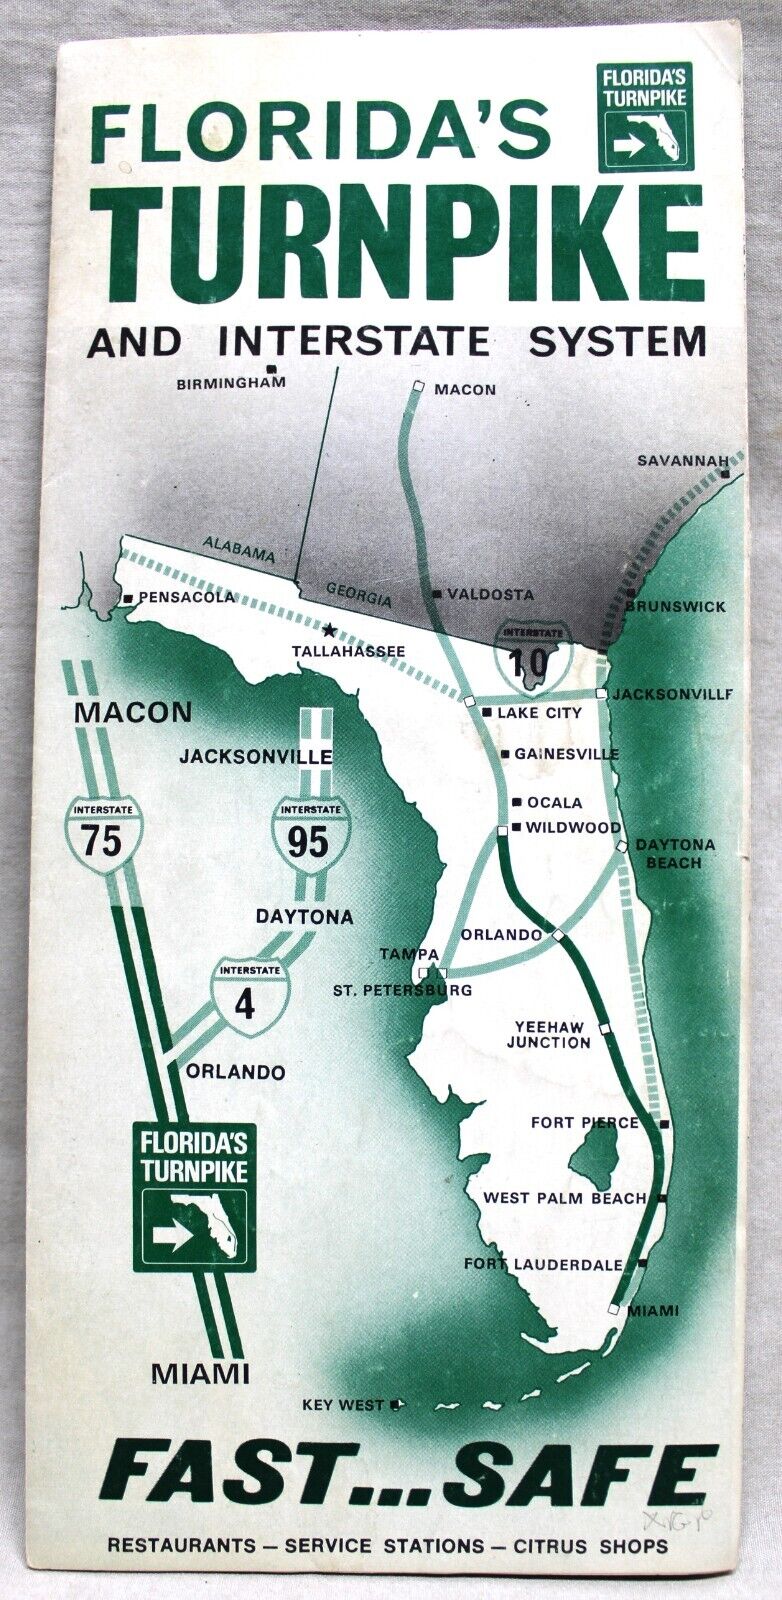 FLORIDA'S TURNPIKE TOURISM TRAVEL BROCHURE TOLL GUIDE MAP ABOUT 1970 VINTAGE